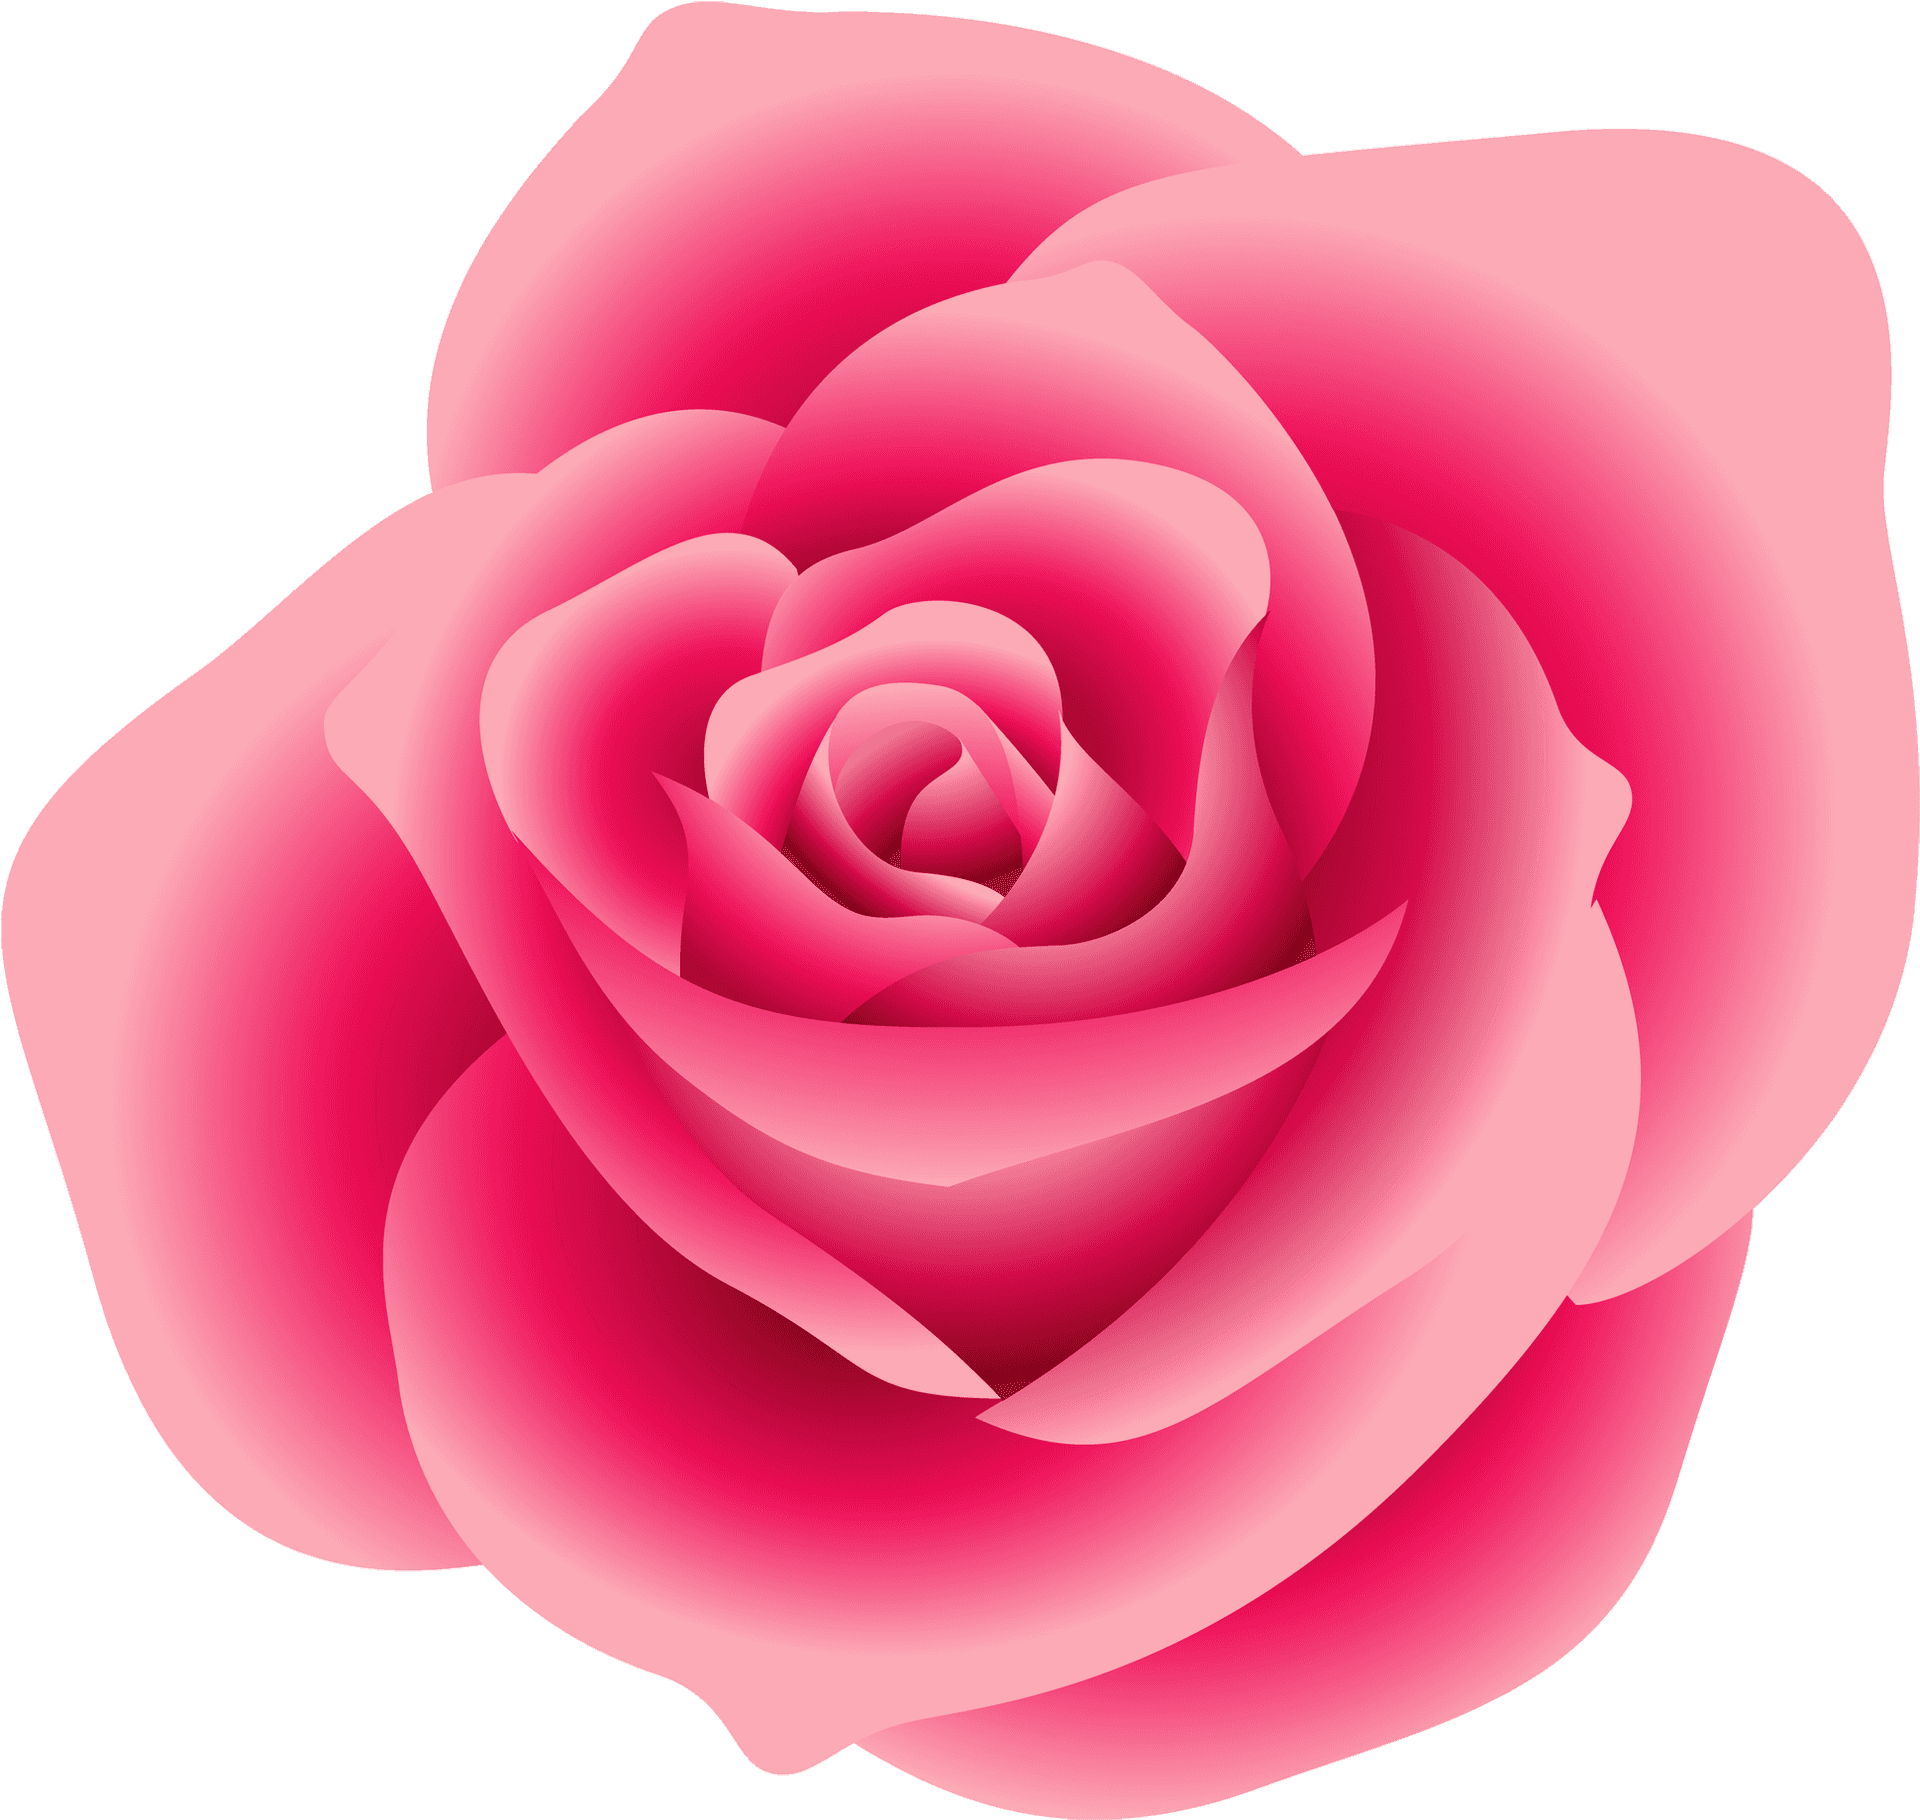 Vibrant Pink Rose Graphic PNG